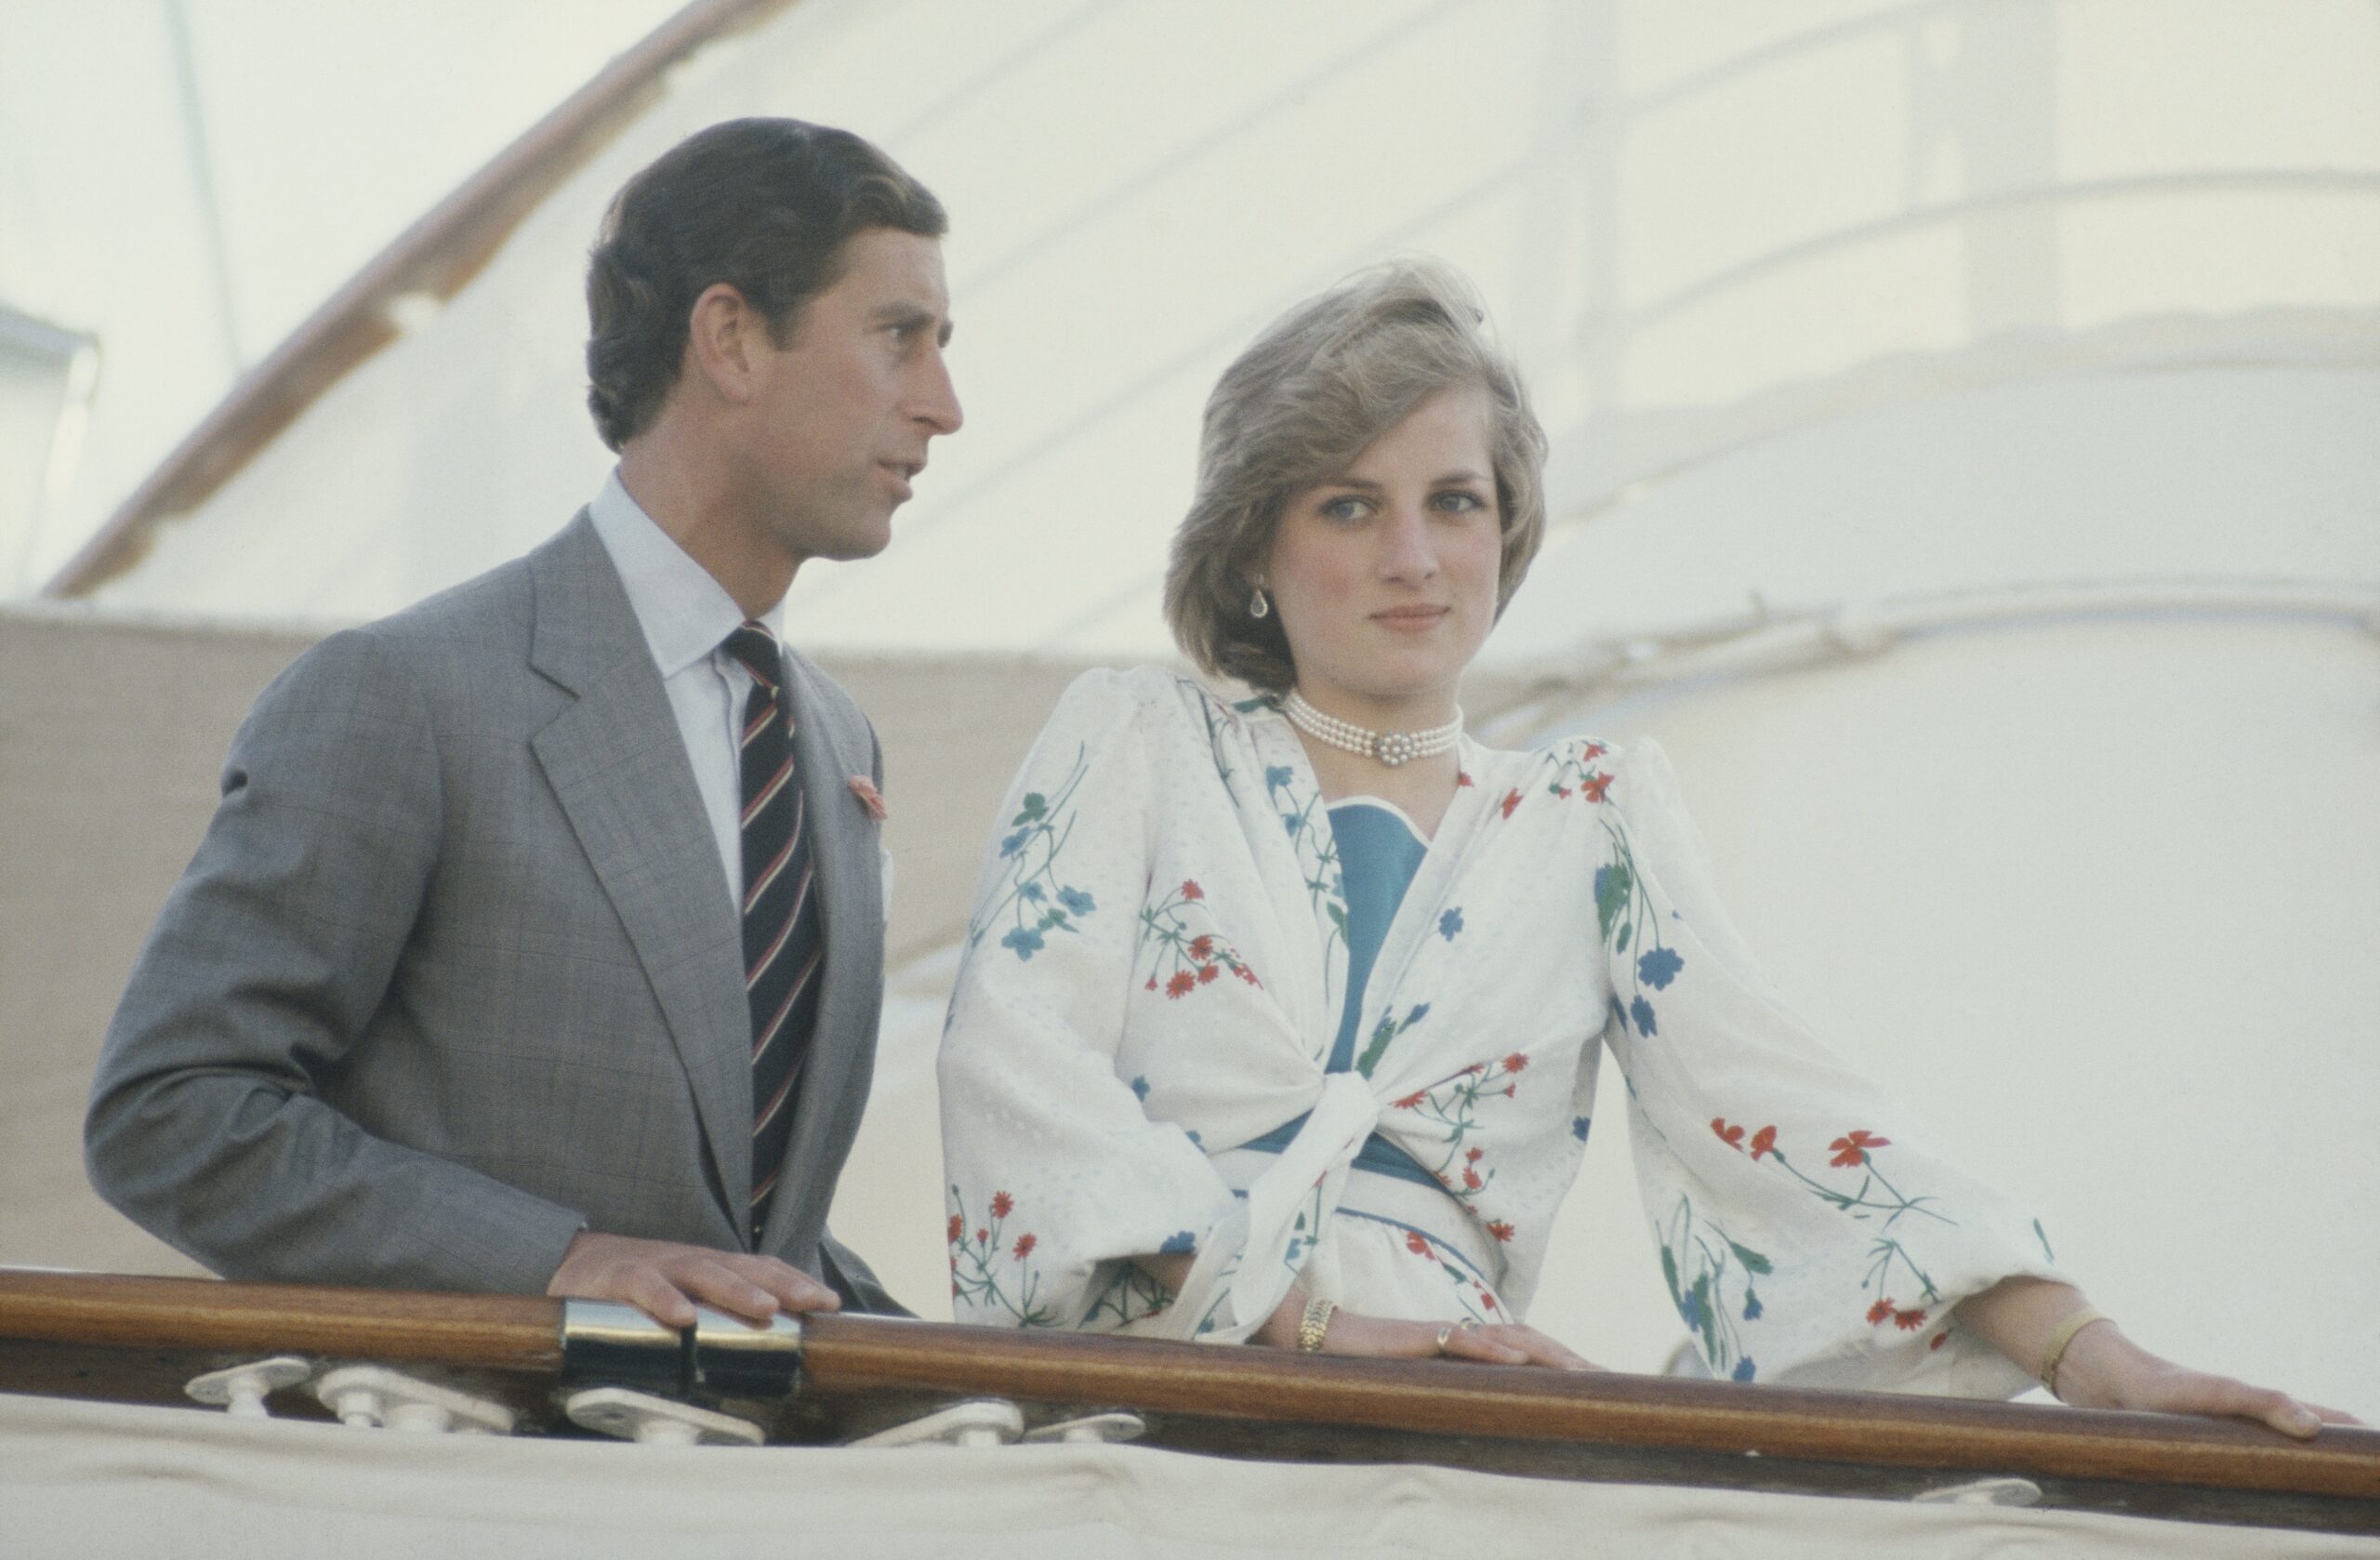 Prince Charles and Diana, Princess of Wales on board the Royal Yacht Britannia in Gibraltar, at the start of their honeymoon cruise, August 1981. | Source: Getty Images